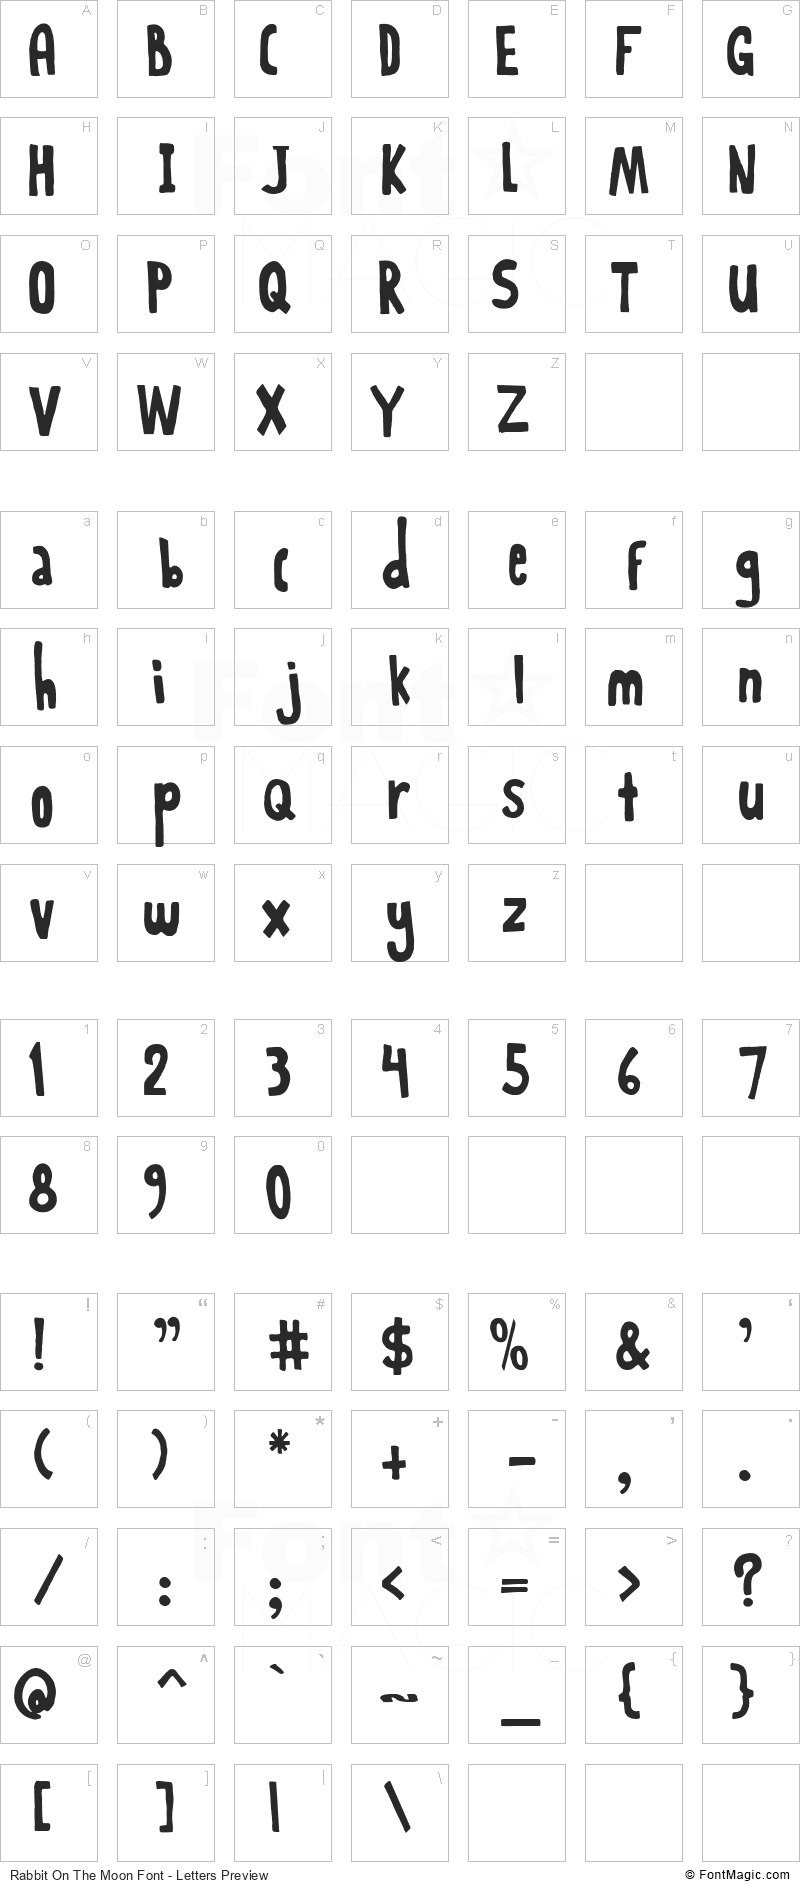 Rabbit On The Moon Font - All Latters Preview Chart